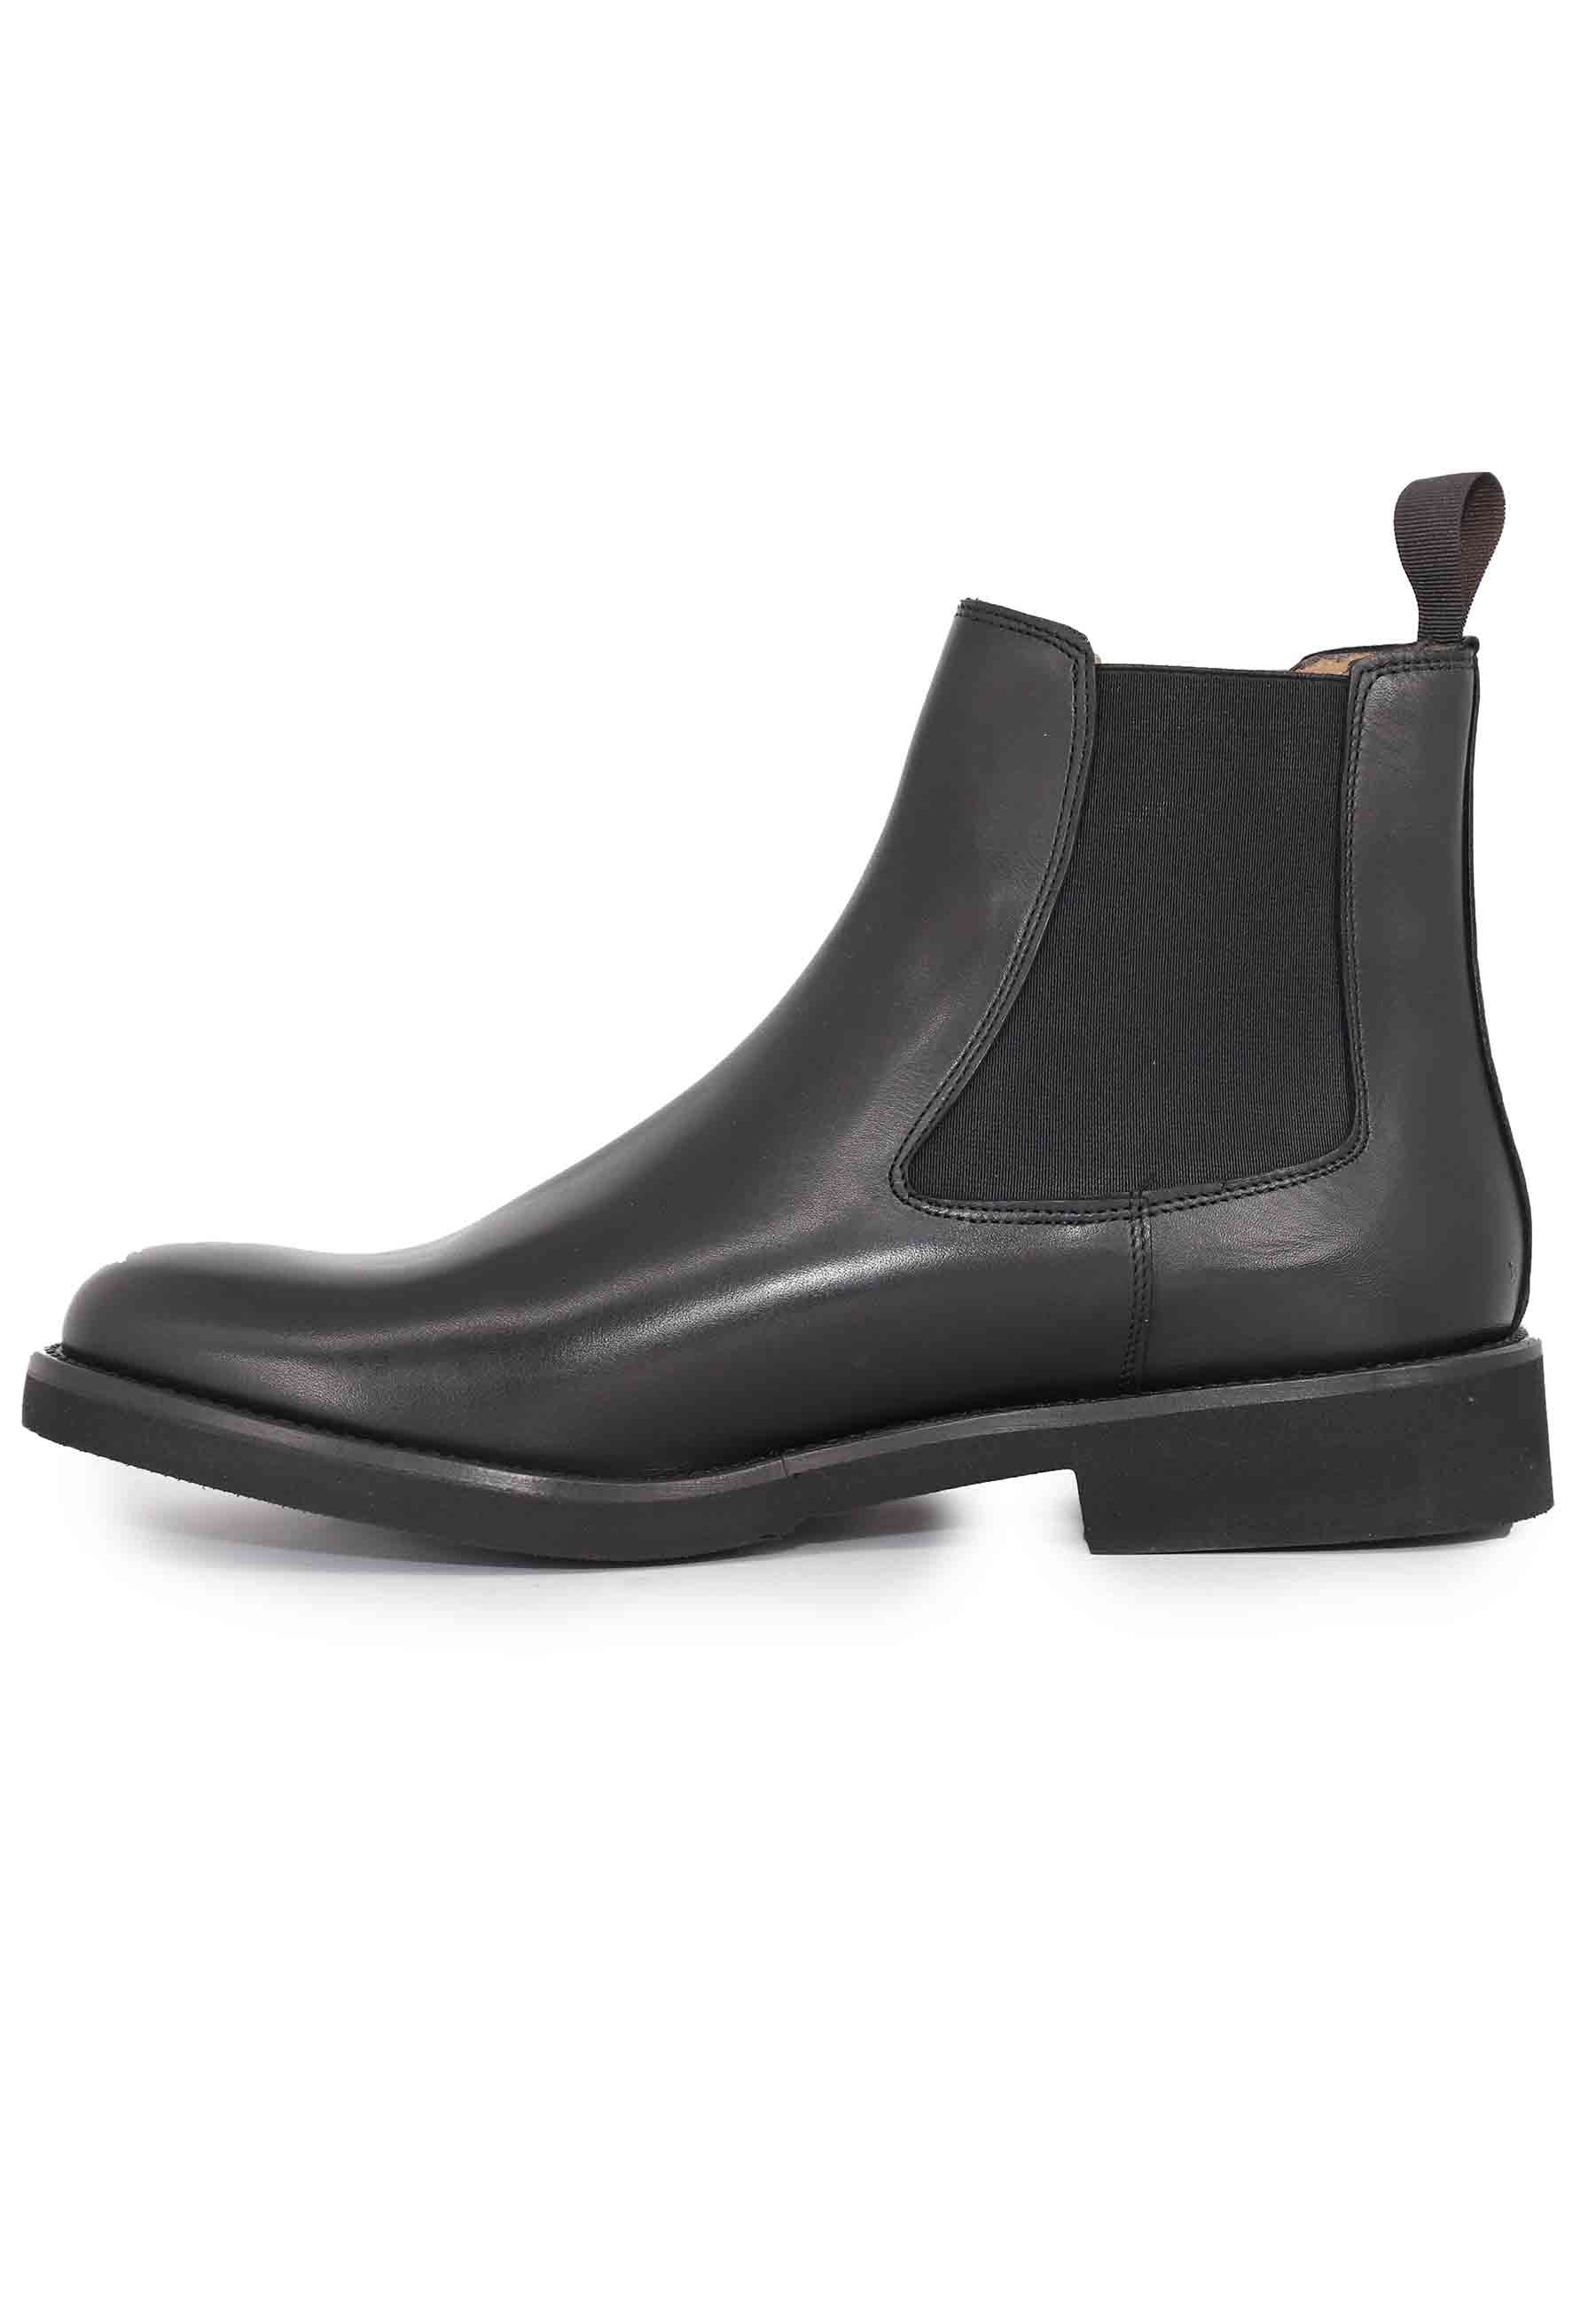 Men's chelsea boot in black leather with ultra-light sole